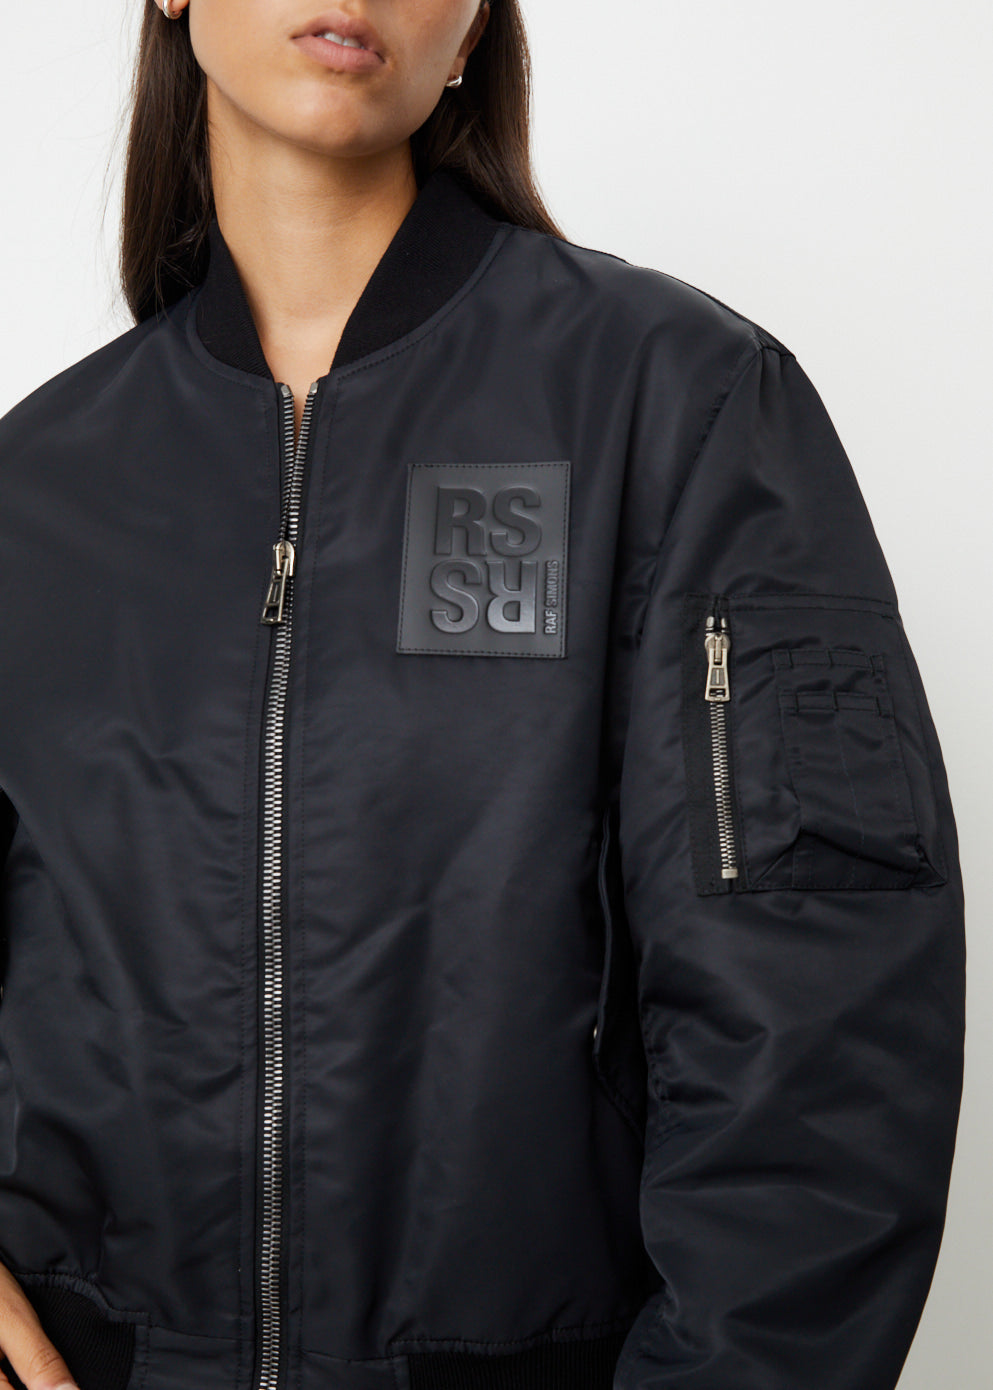 Simply Complicated CGN BOMBER JACKETメンズ